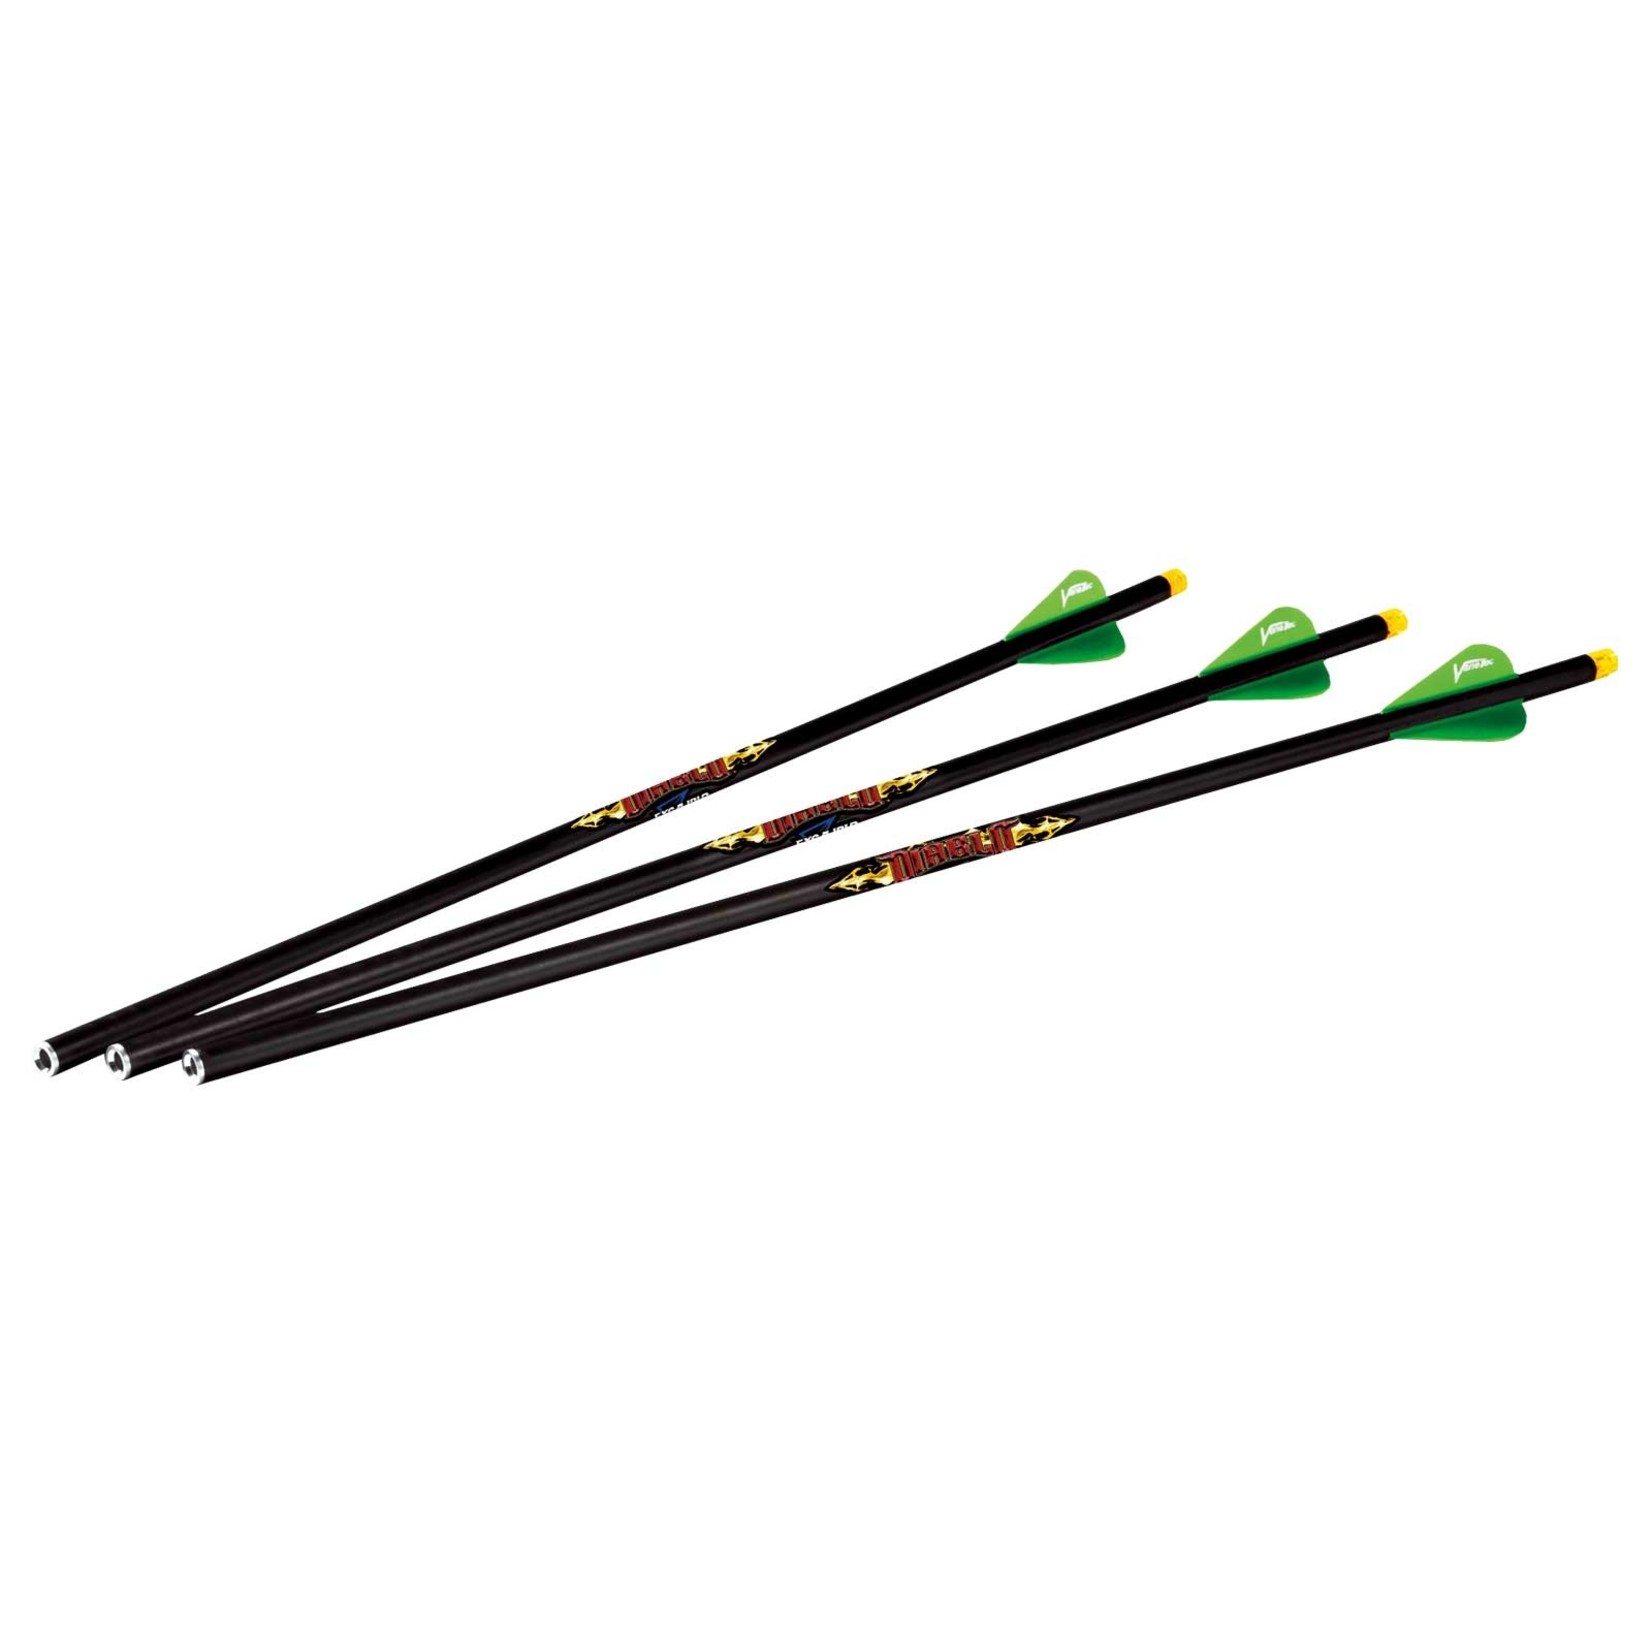 Excalibur Diablo 18" Illuminated Carbon Arrows (3 Pack) For use on all Matrix crossbows